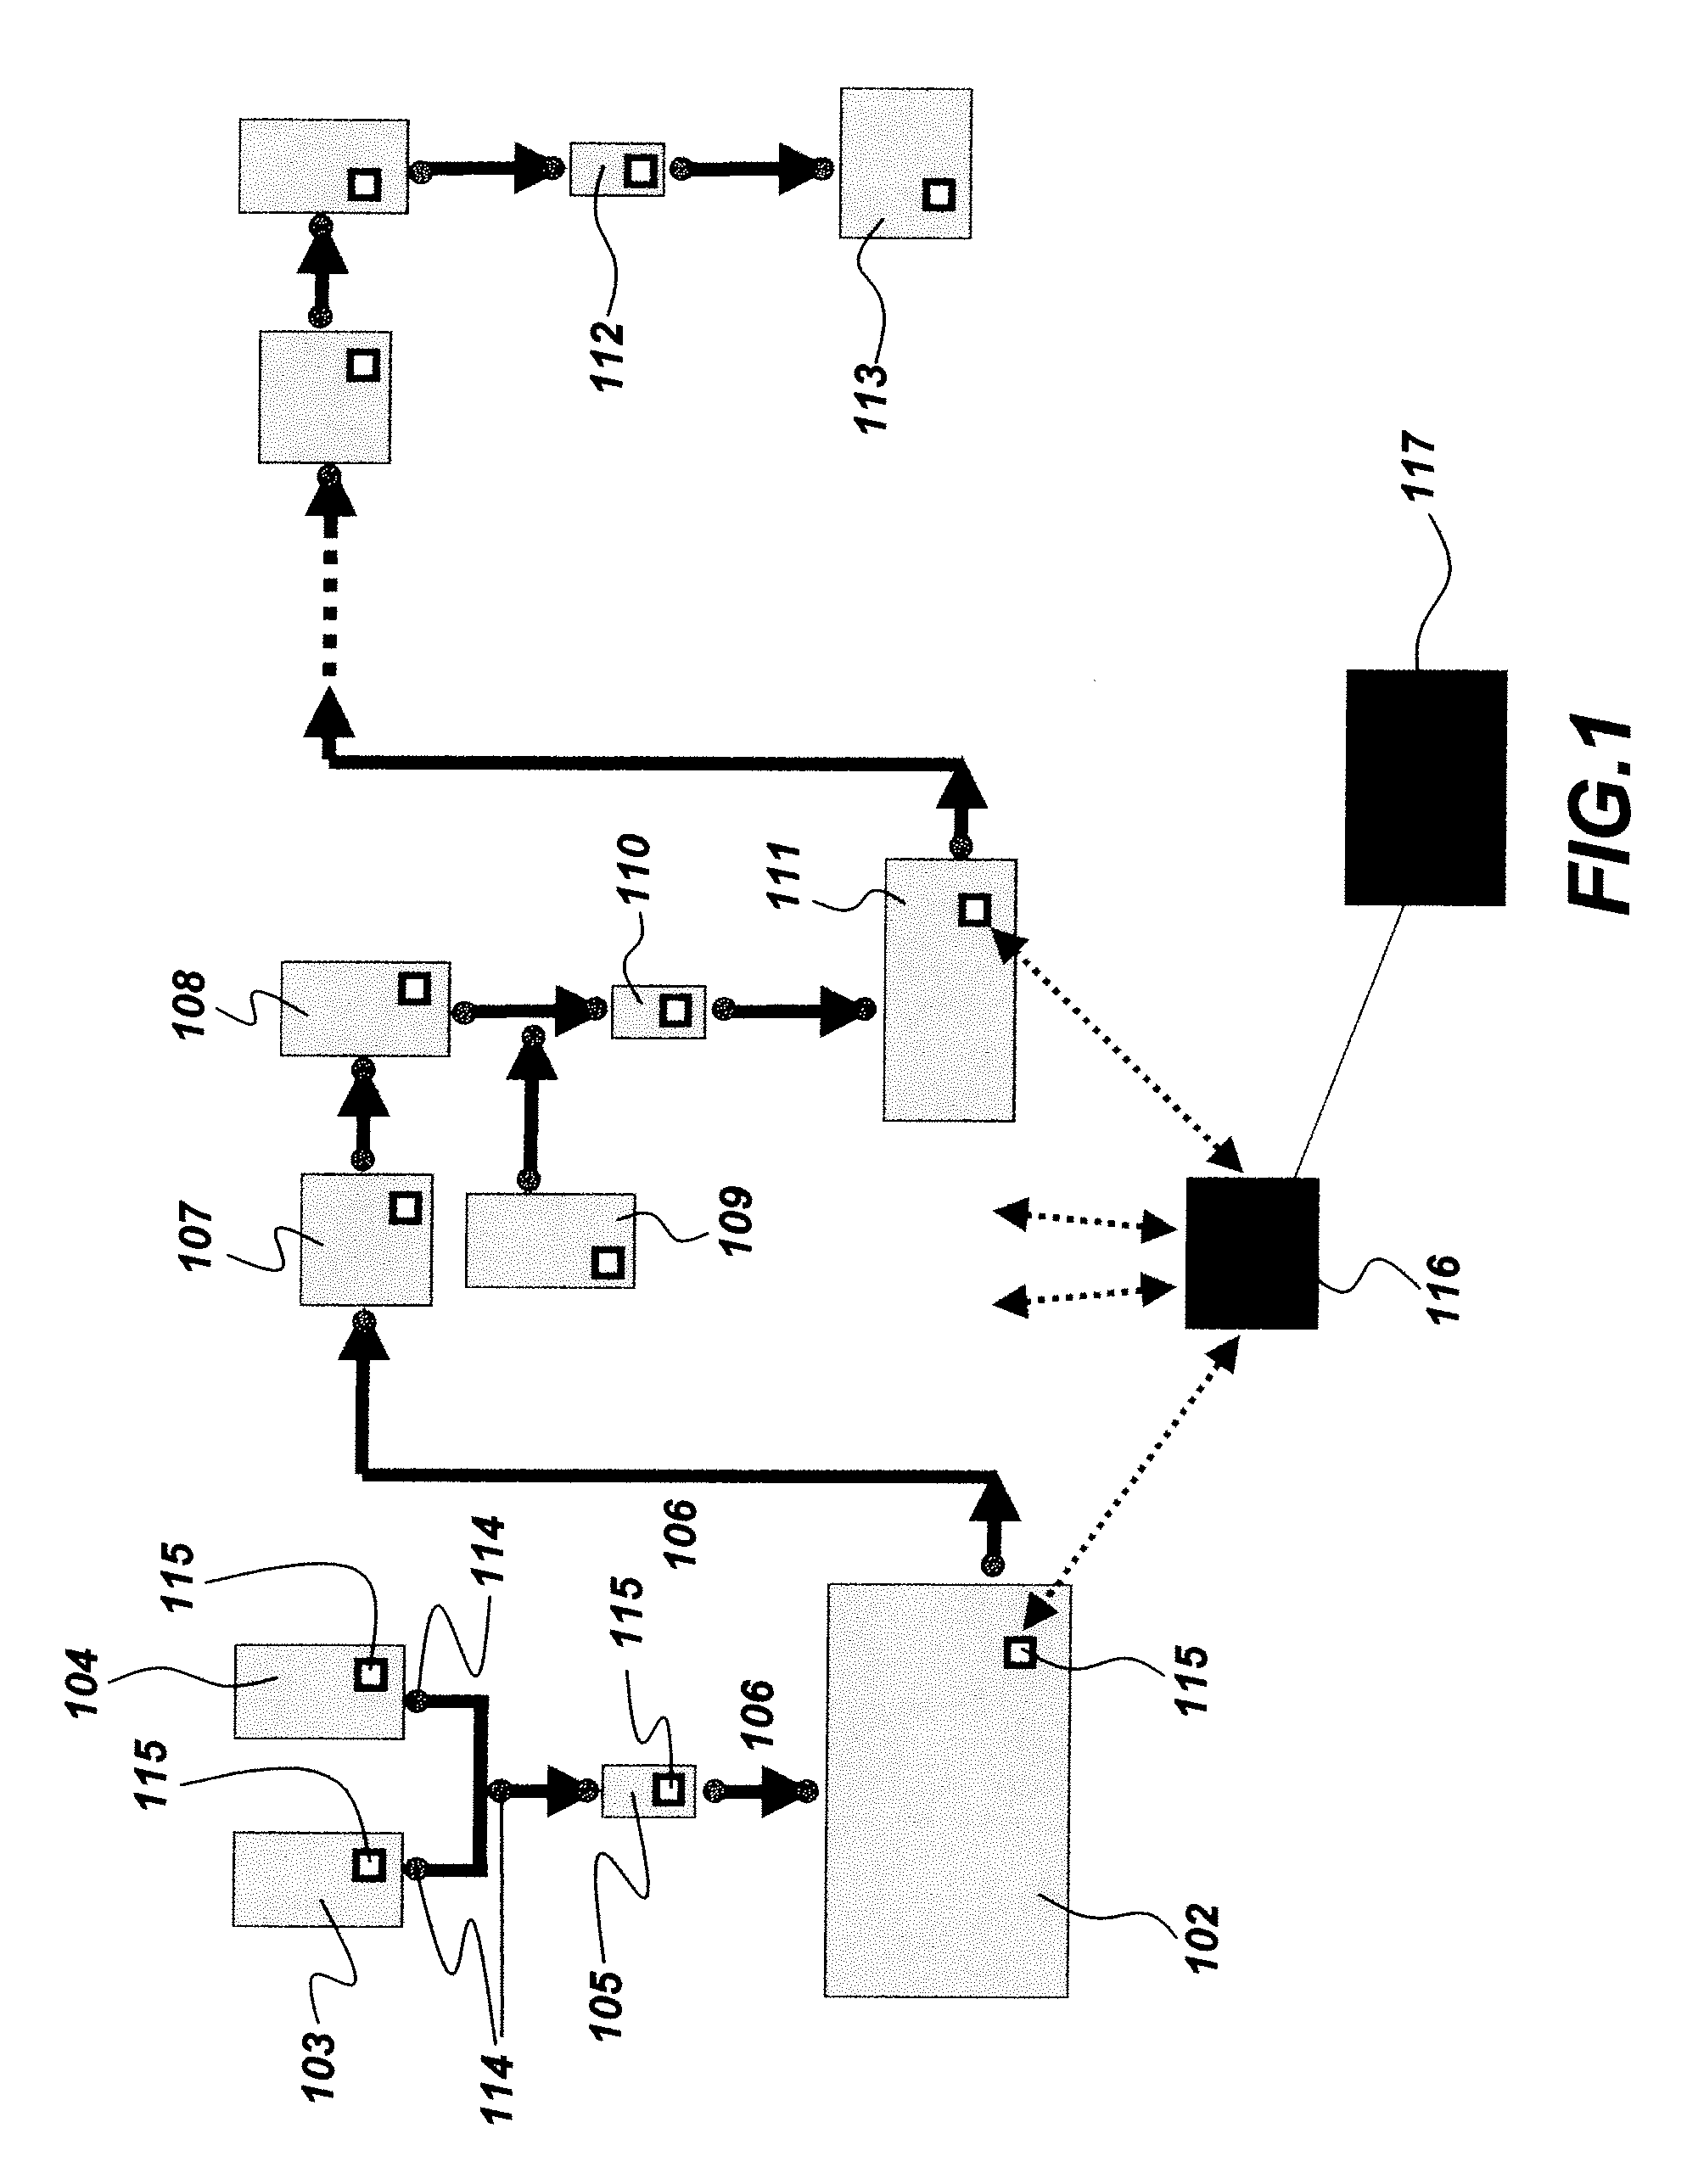 System and method for integrating RFID sensors in manufacturing system comprising single use components